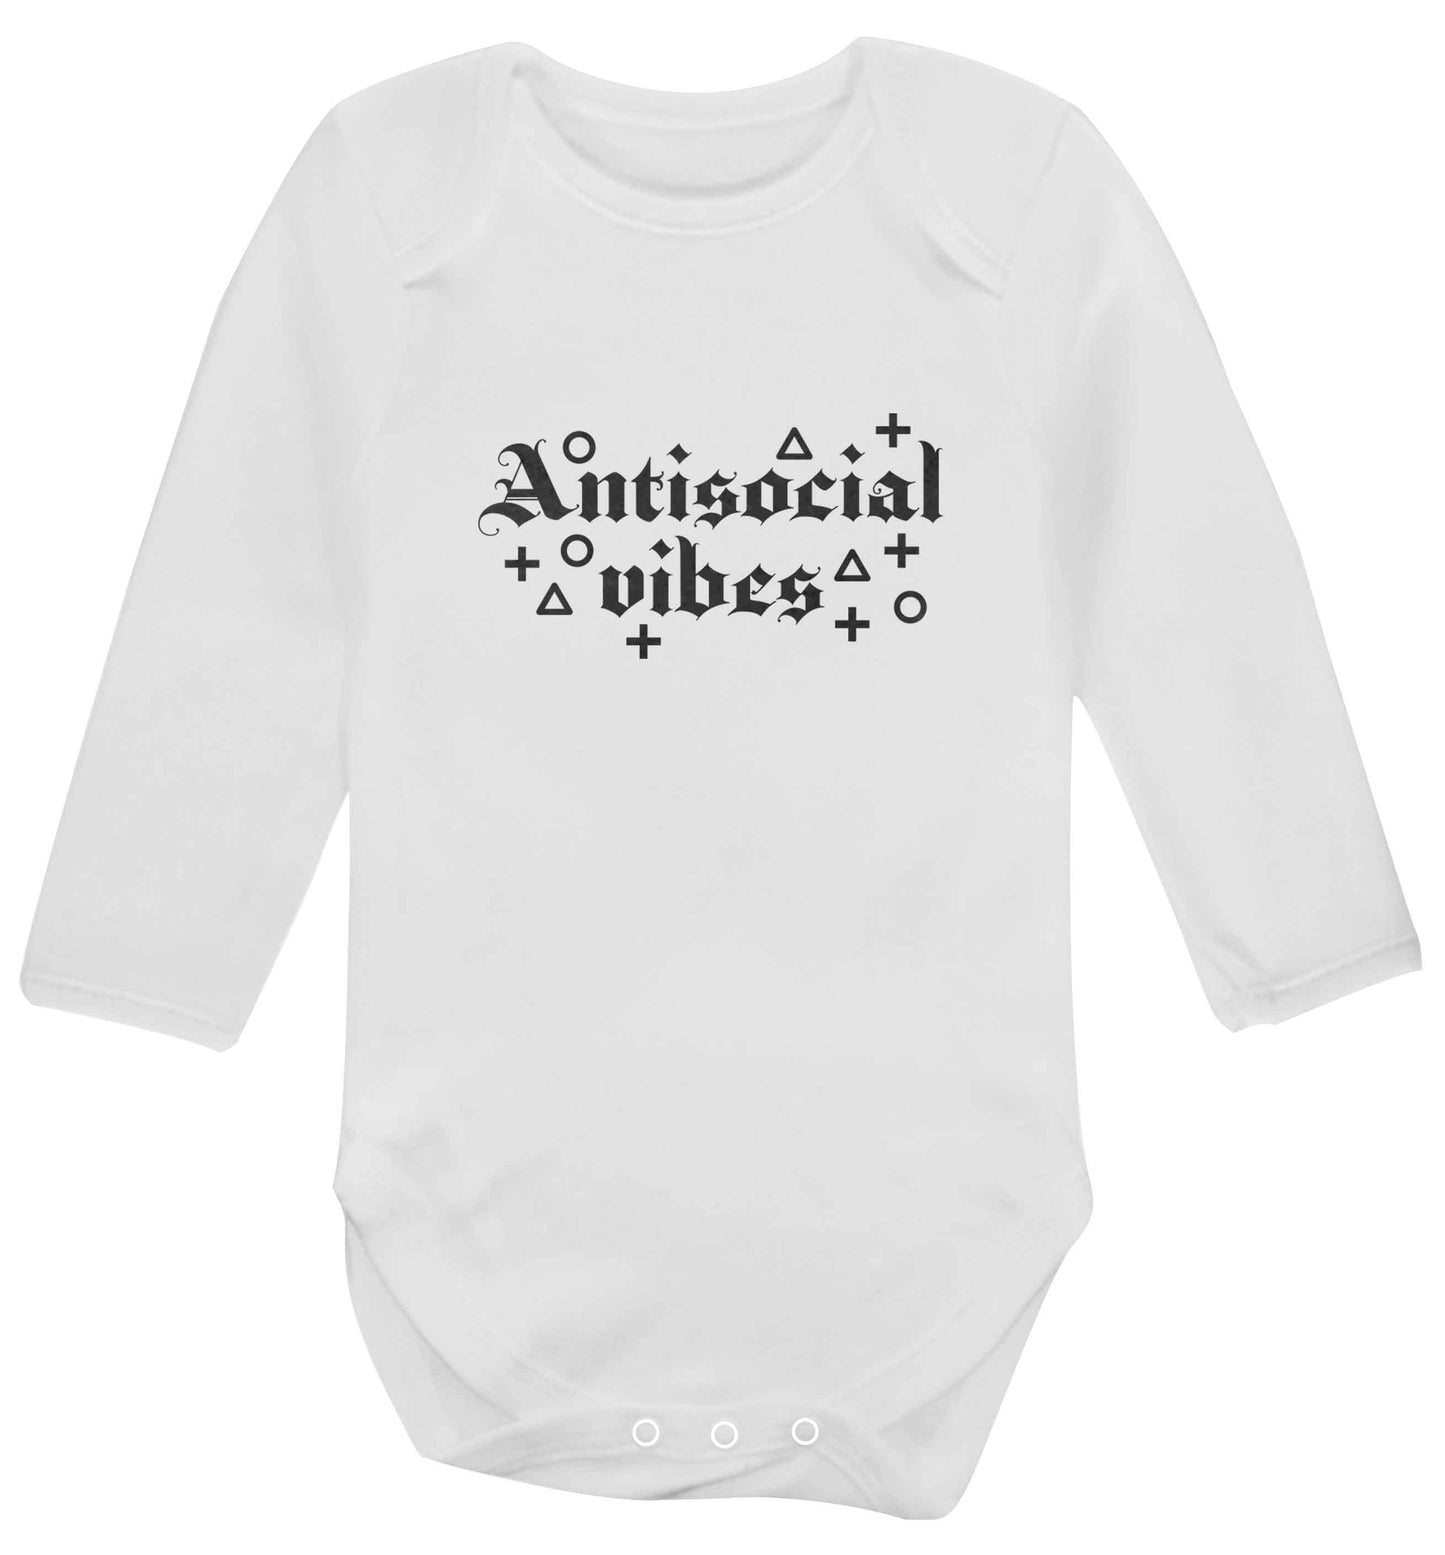 Antisocial vibes baby vest long sleeved white 6-12 months